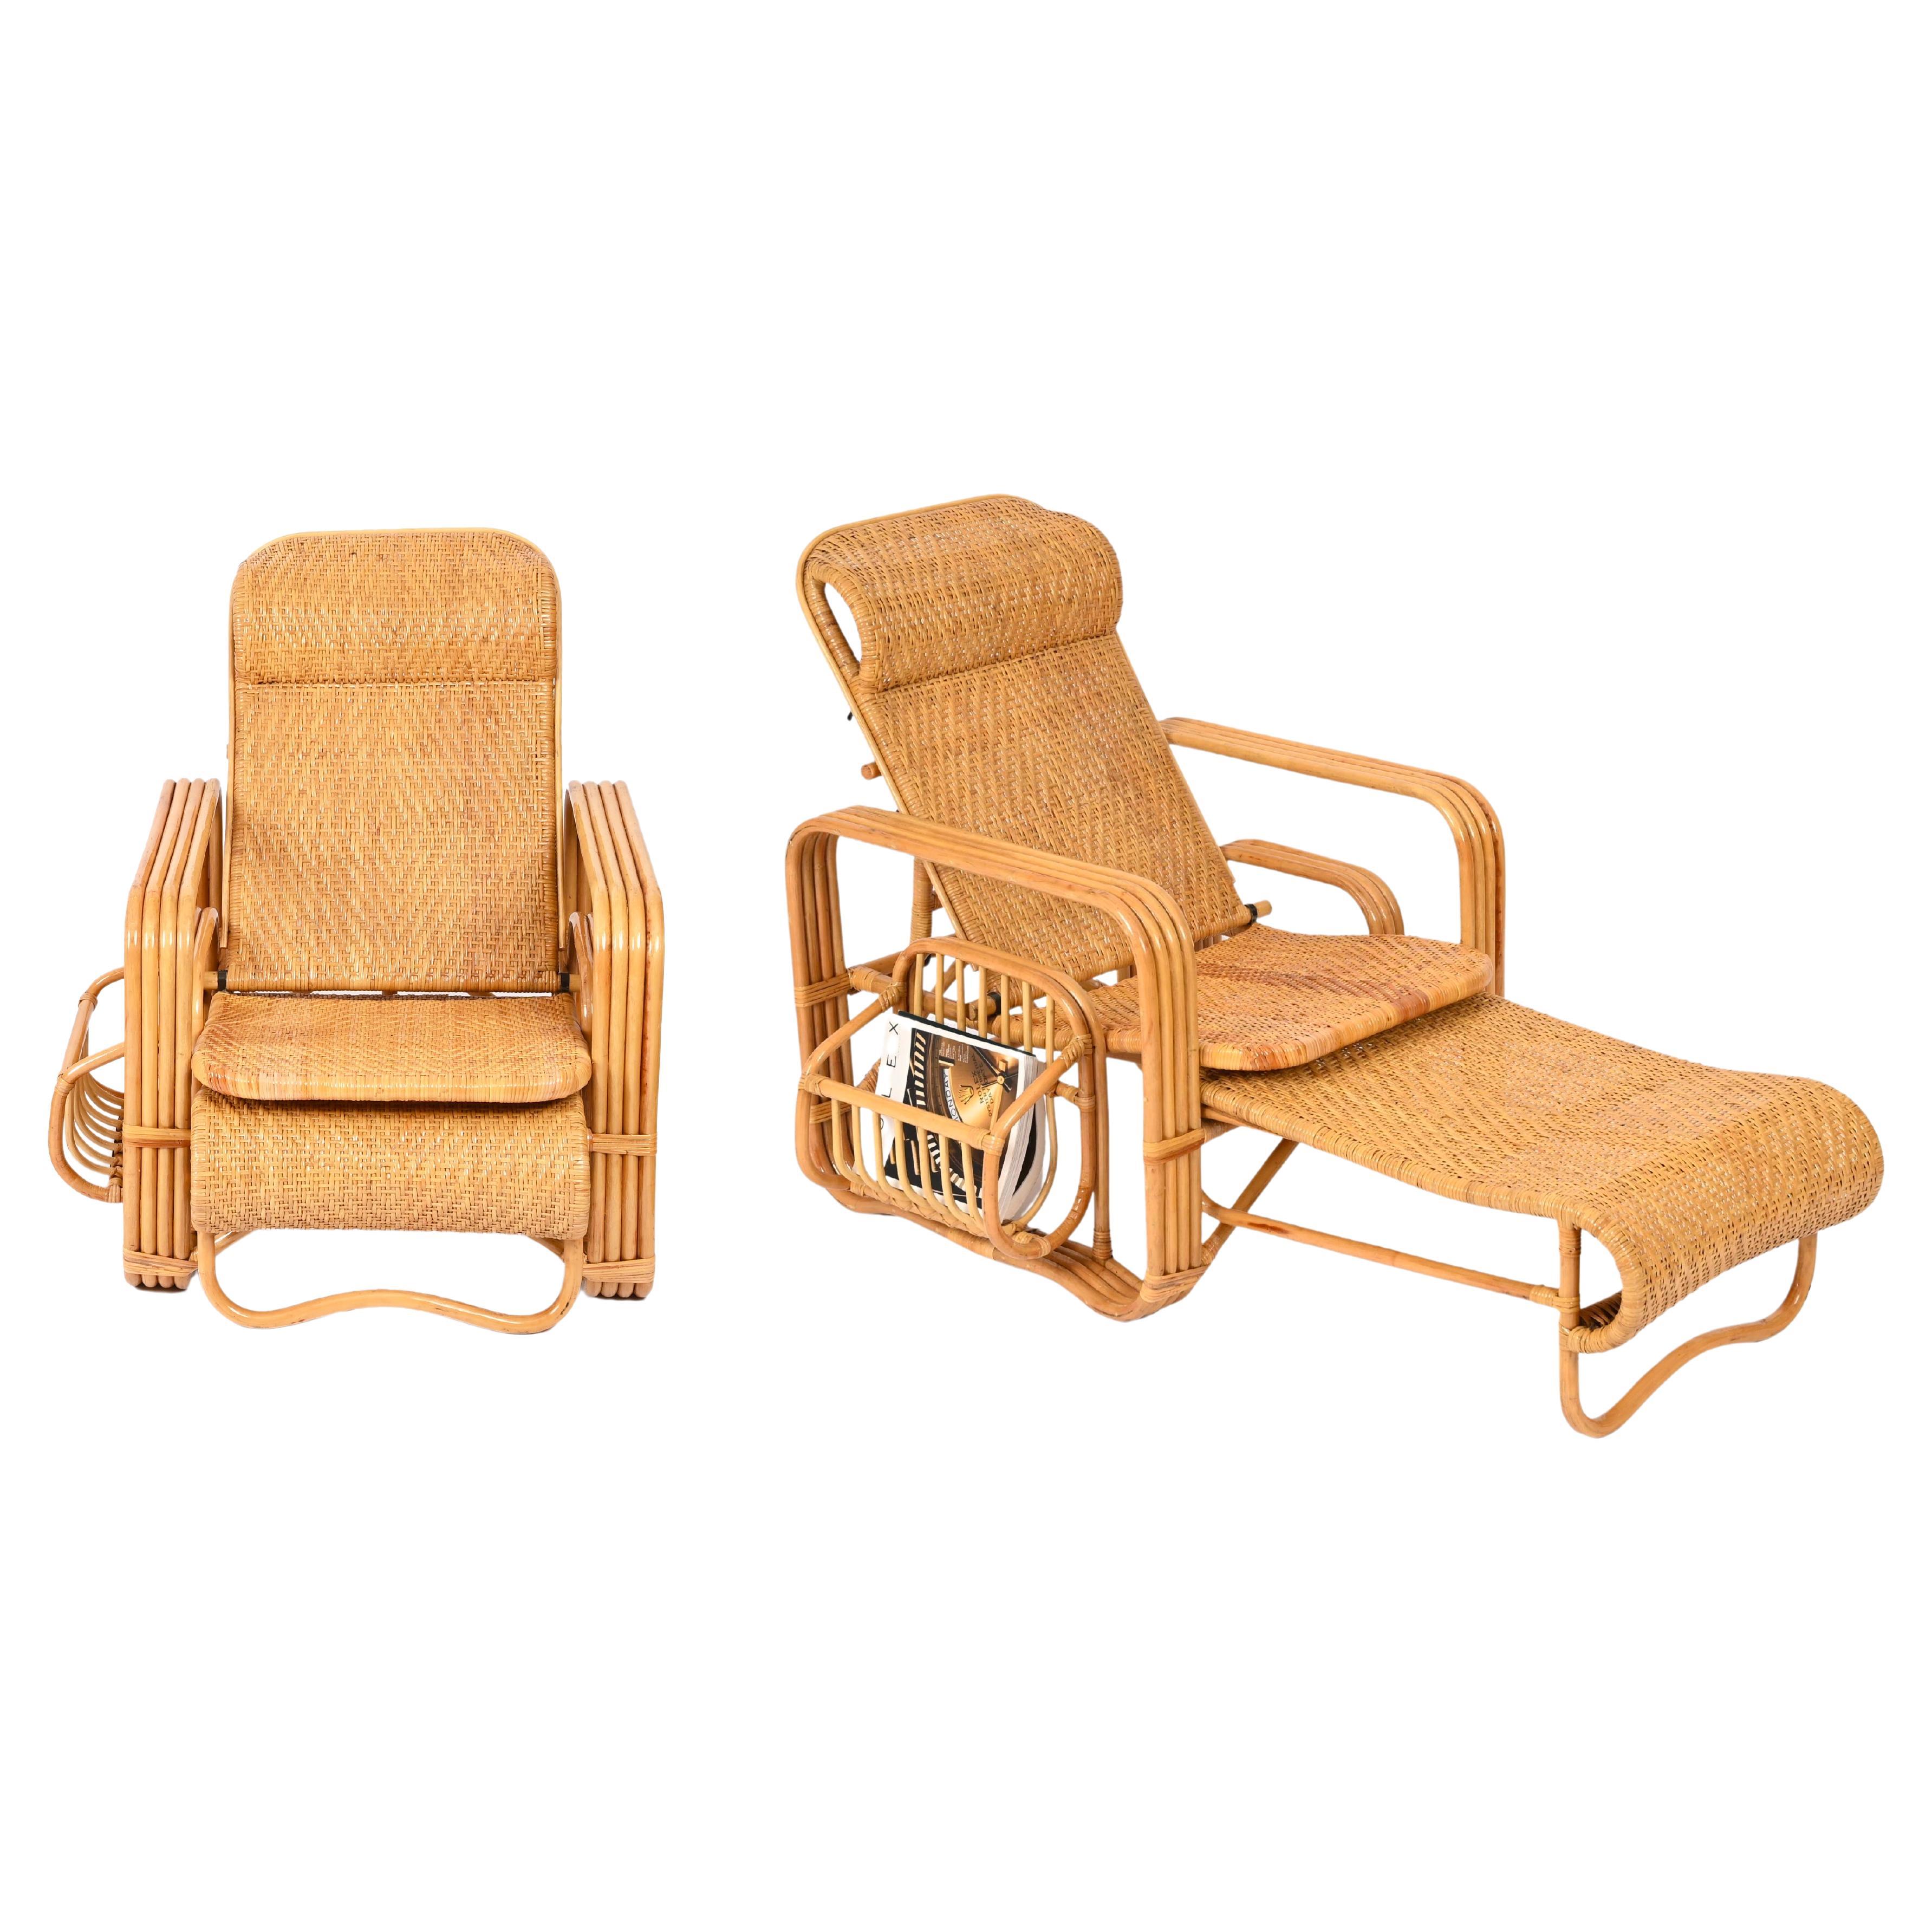 Pair of Adjustable Chaise Longue / Lounge Chairs, Wicker and Rattan, Italy '70s  For Sale